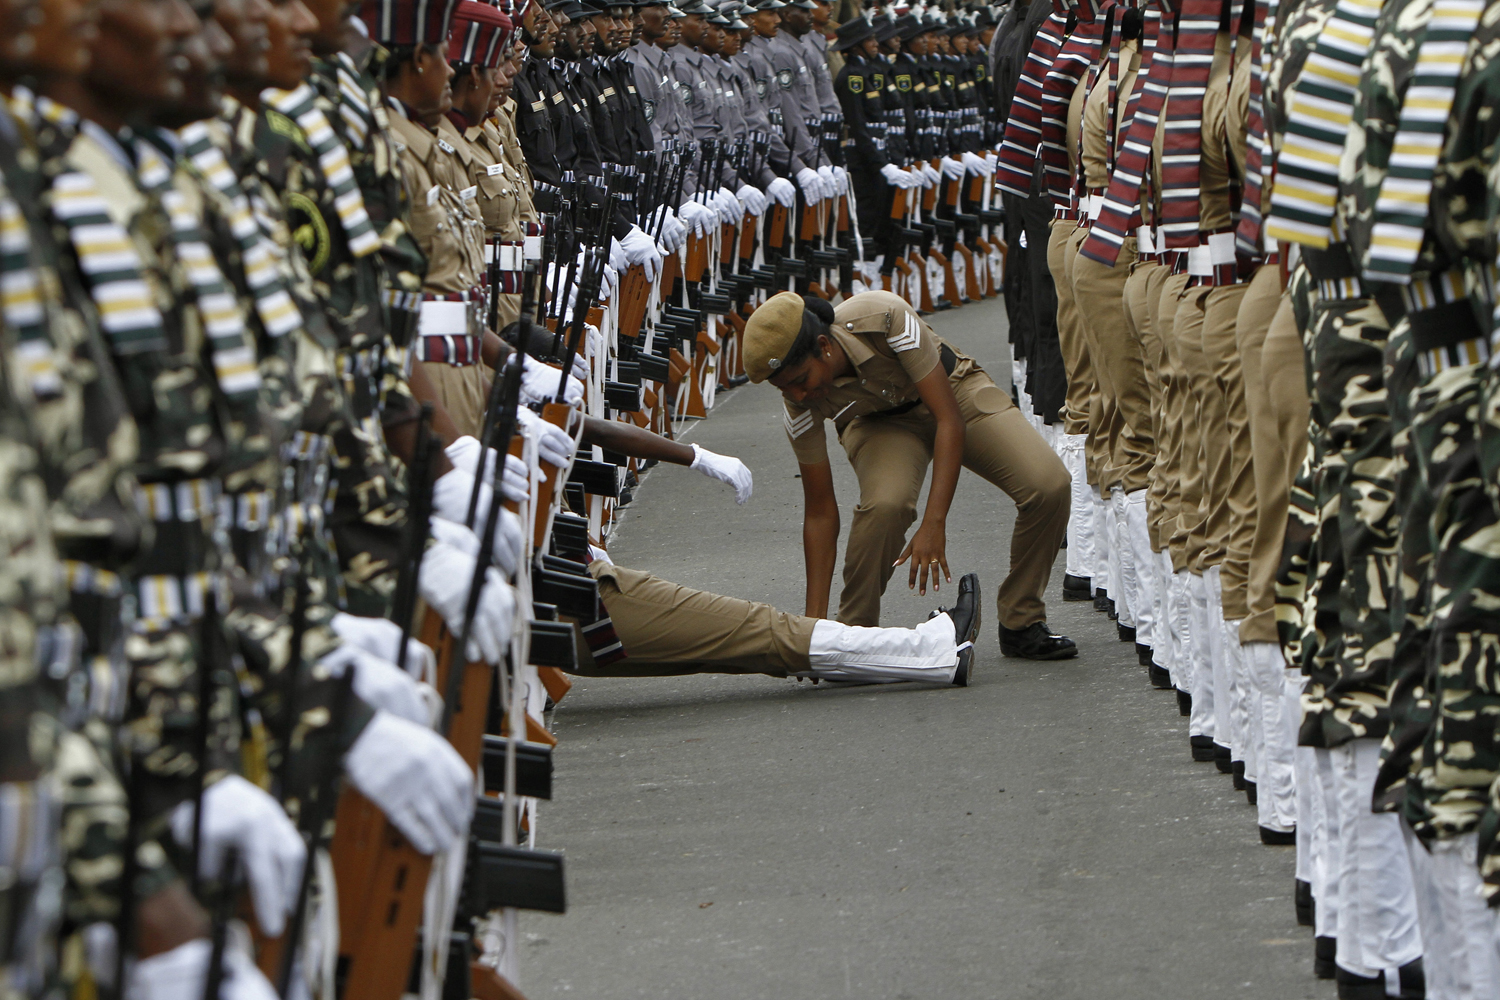 An Indian policewoman helps her comrade who fainted during the full-dress rehearsal for India's Independence Day celebrations in Chennai